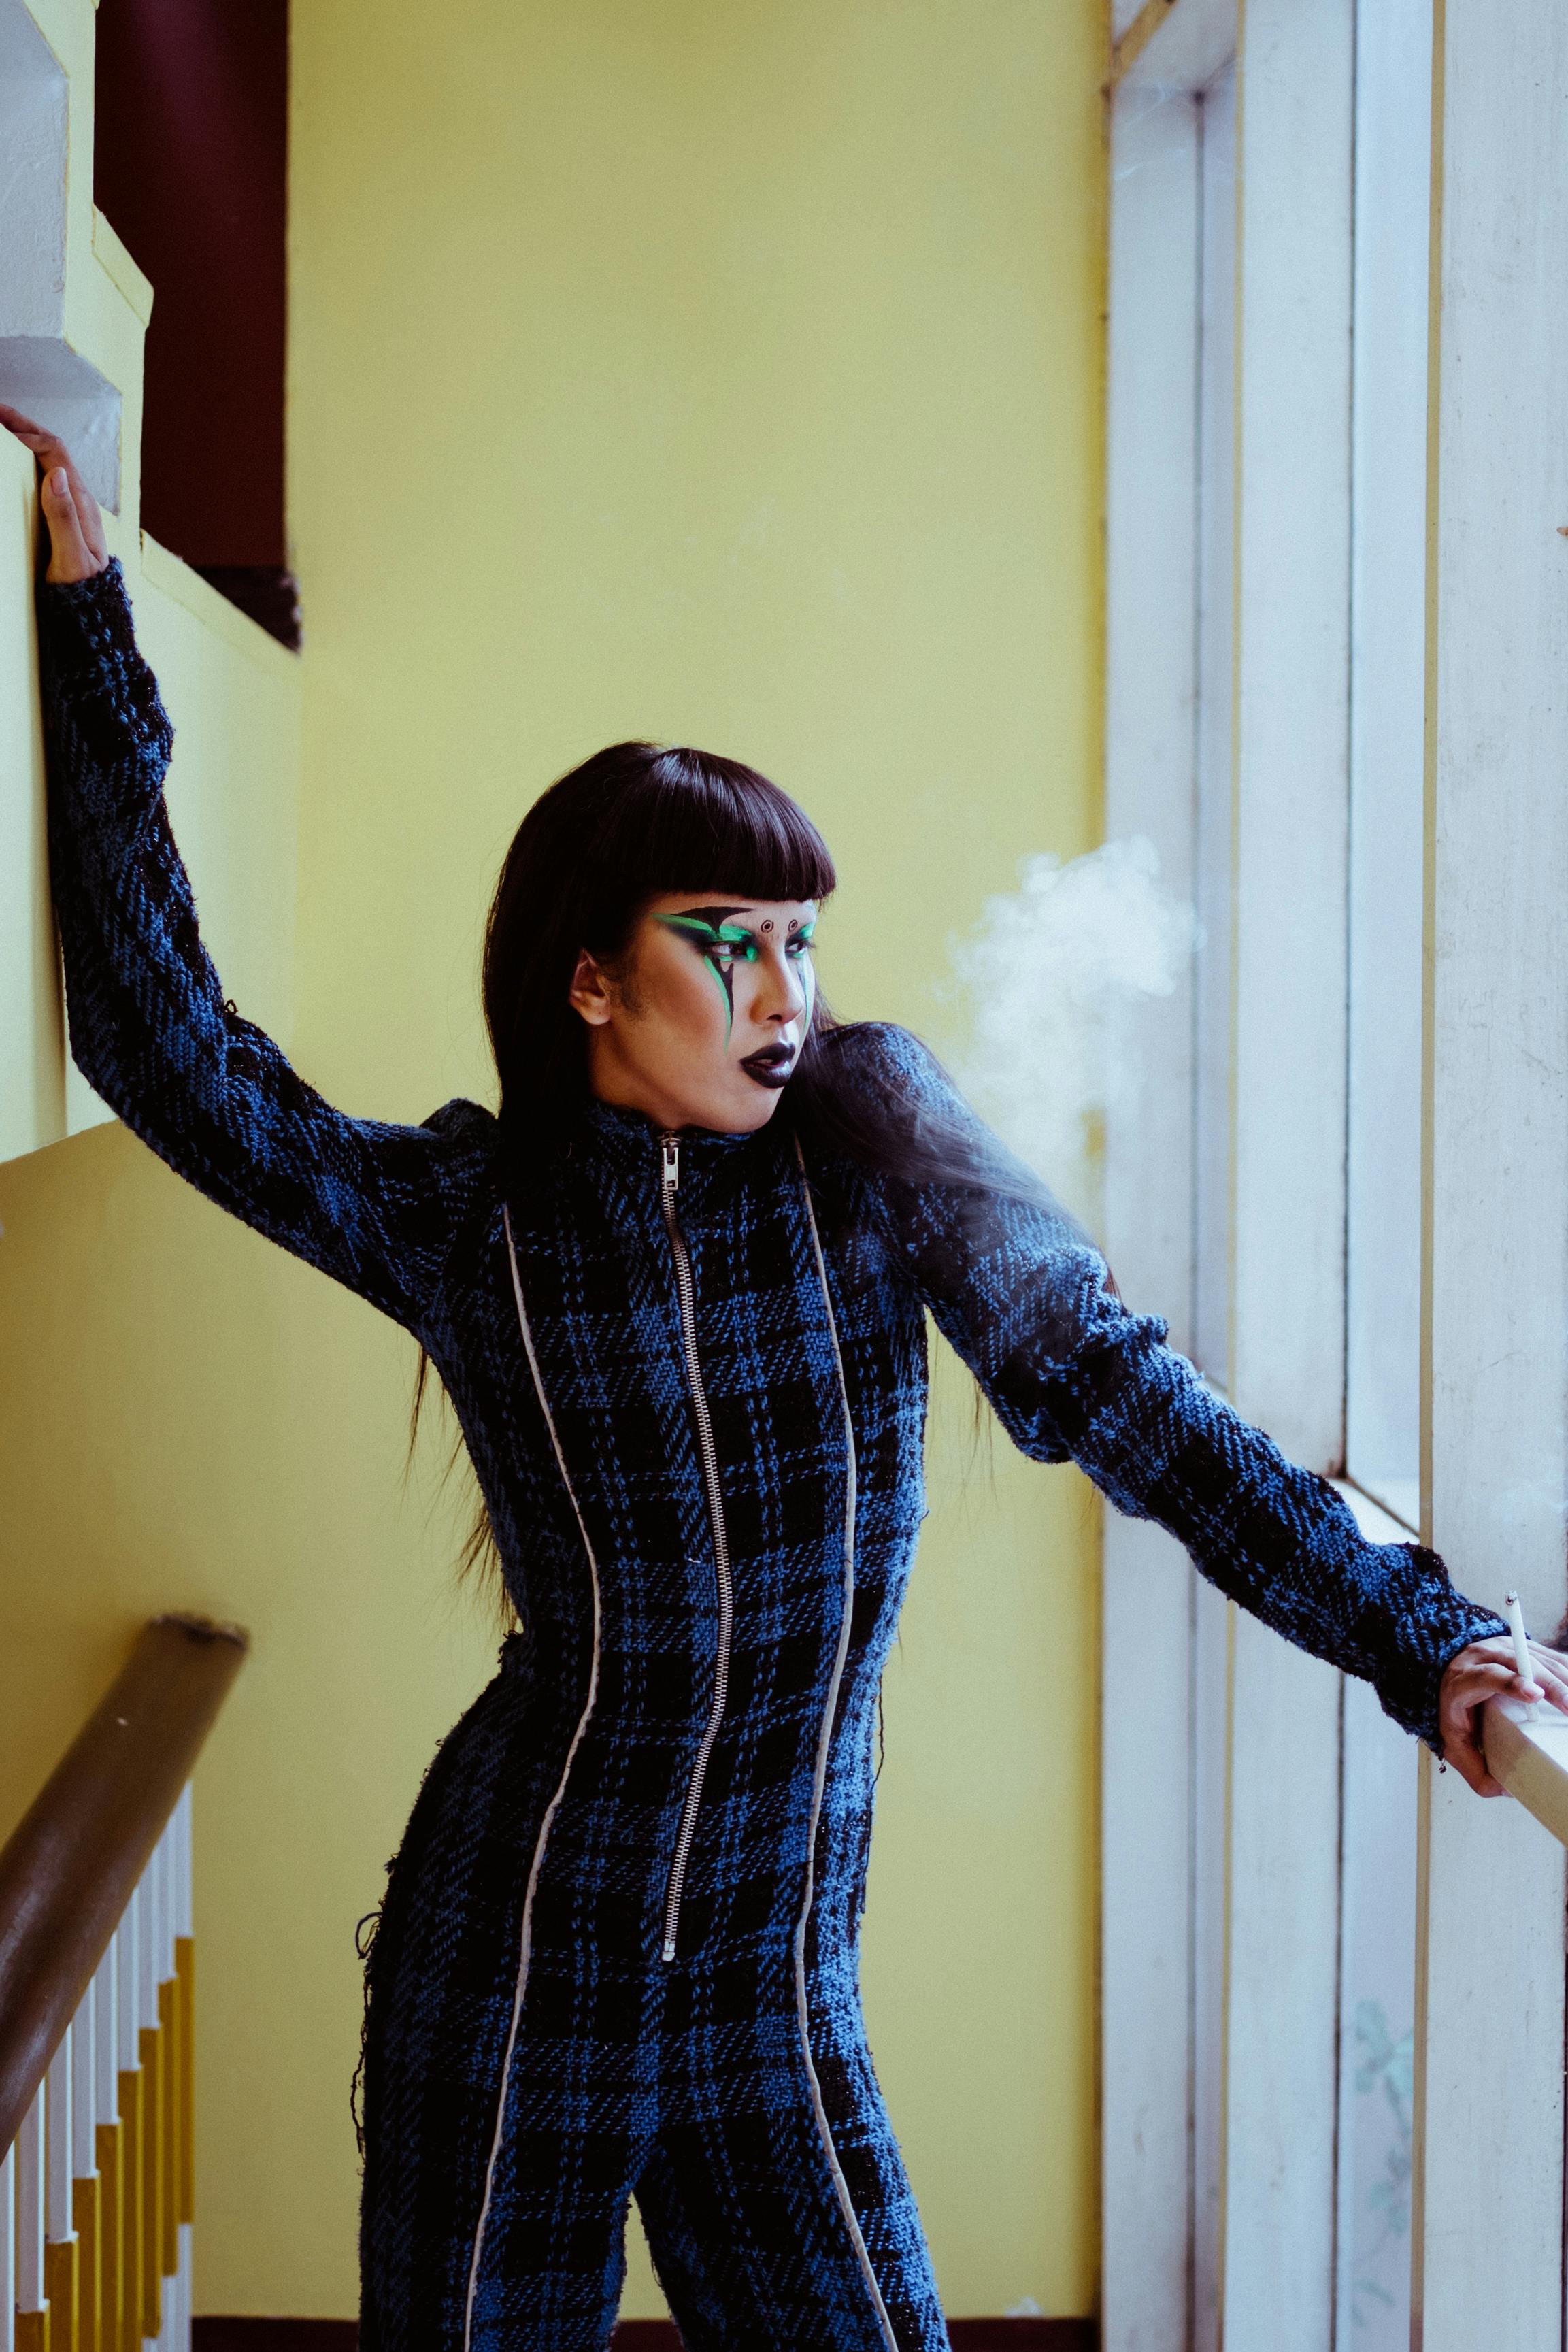 fashionable asian woman with cigarette near window